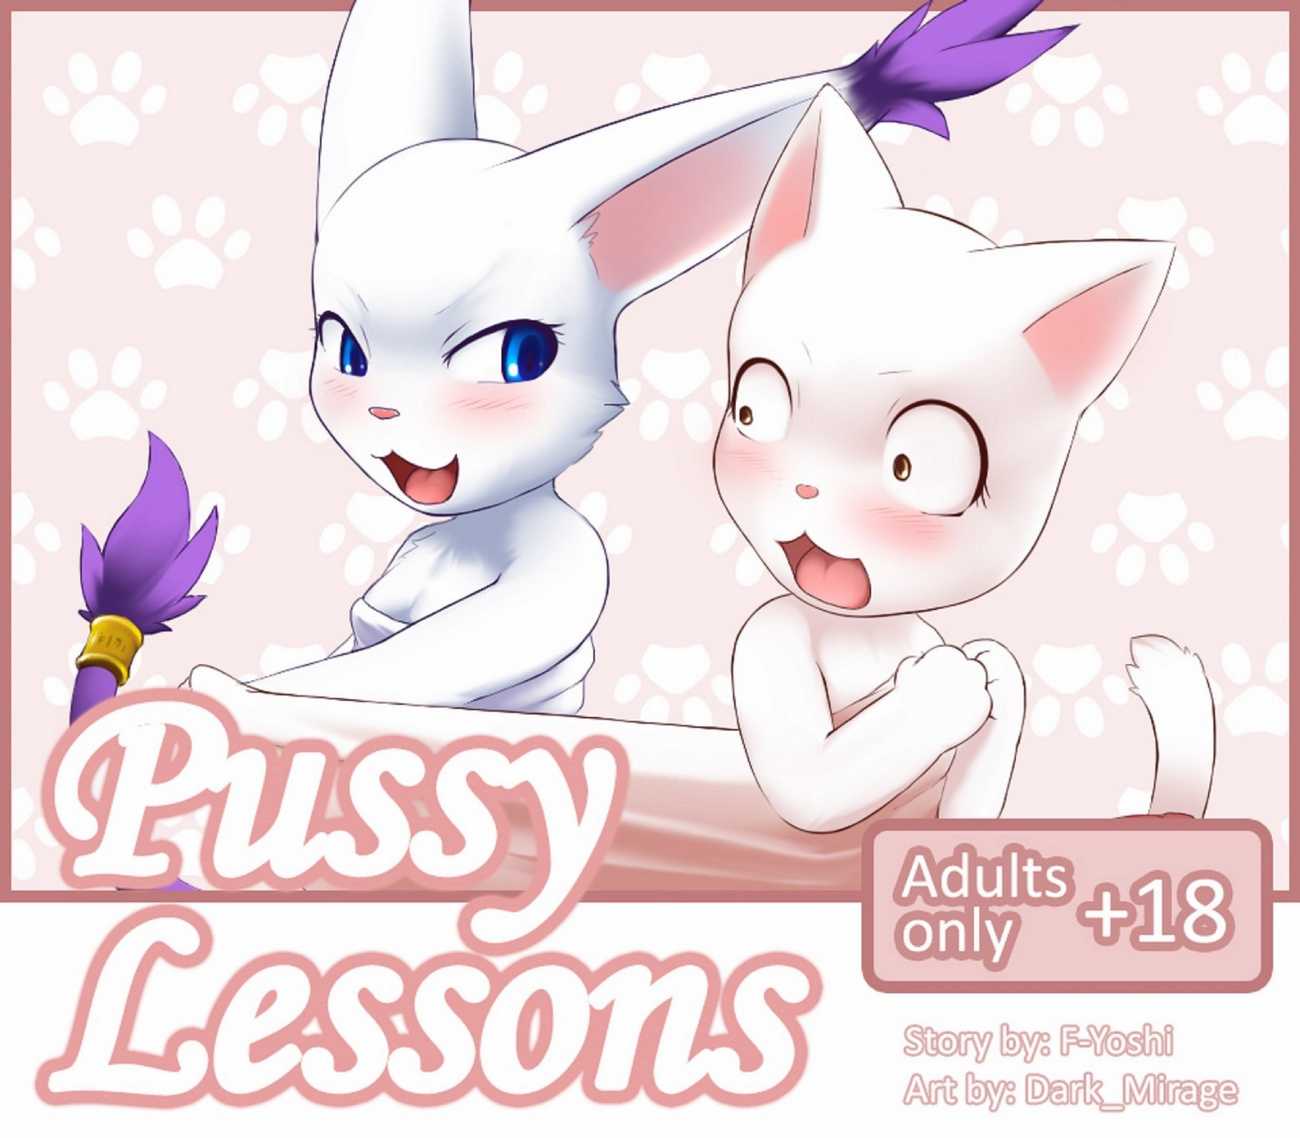 Pussy Lessons page 1